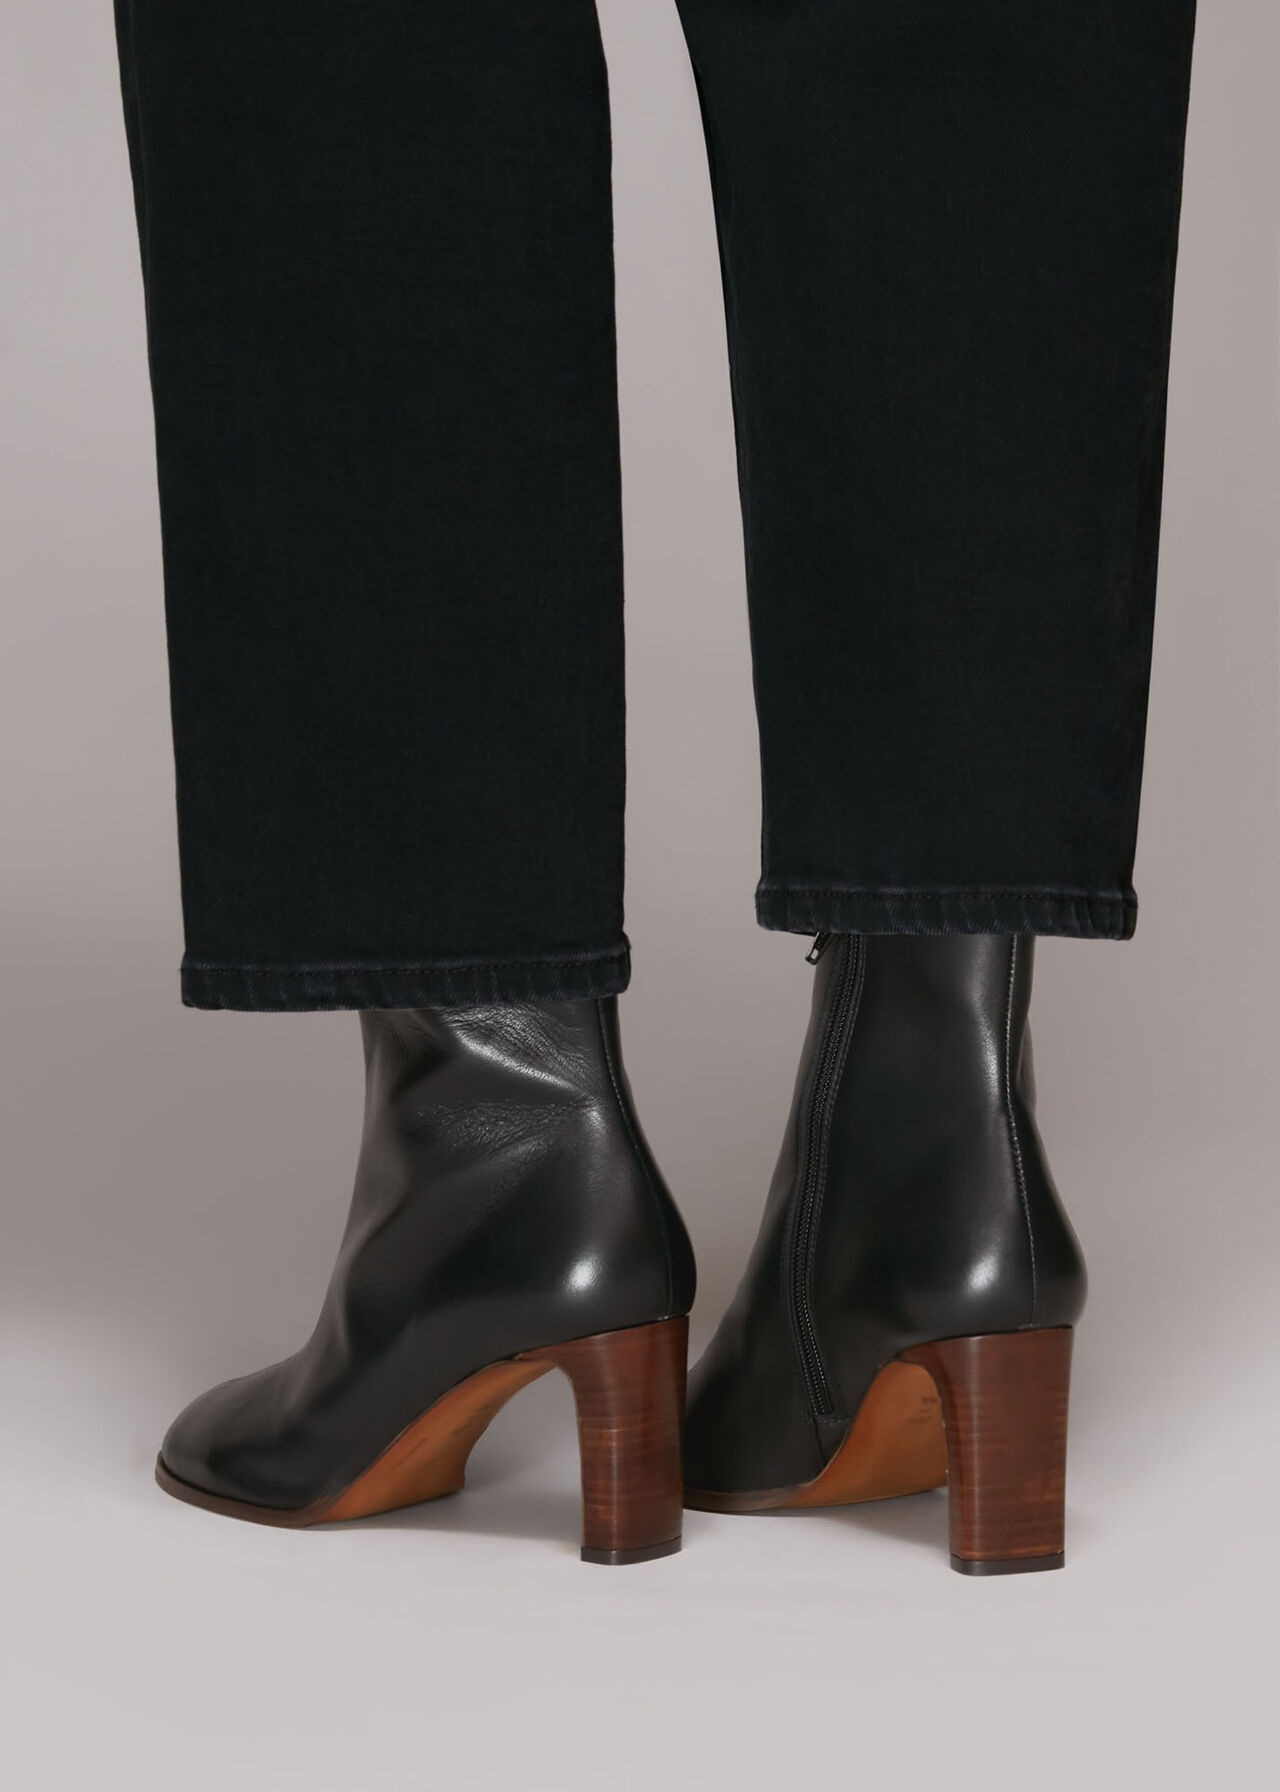 Daphne Heeled Ankle Boot